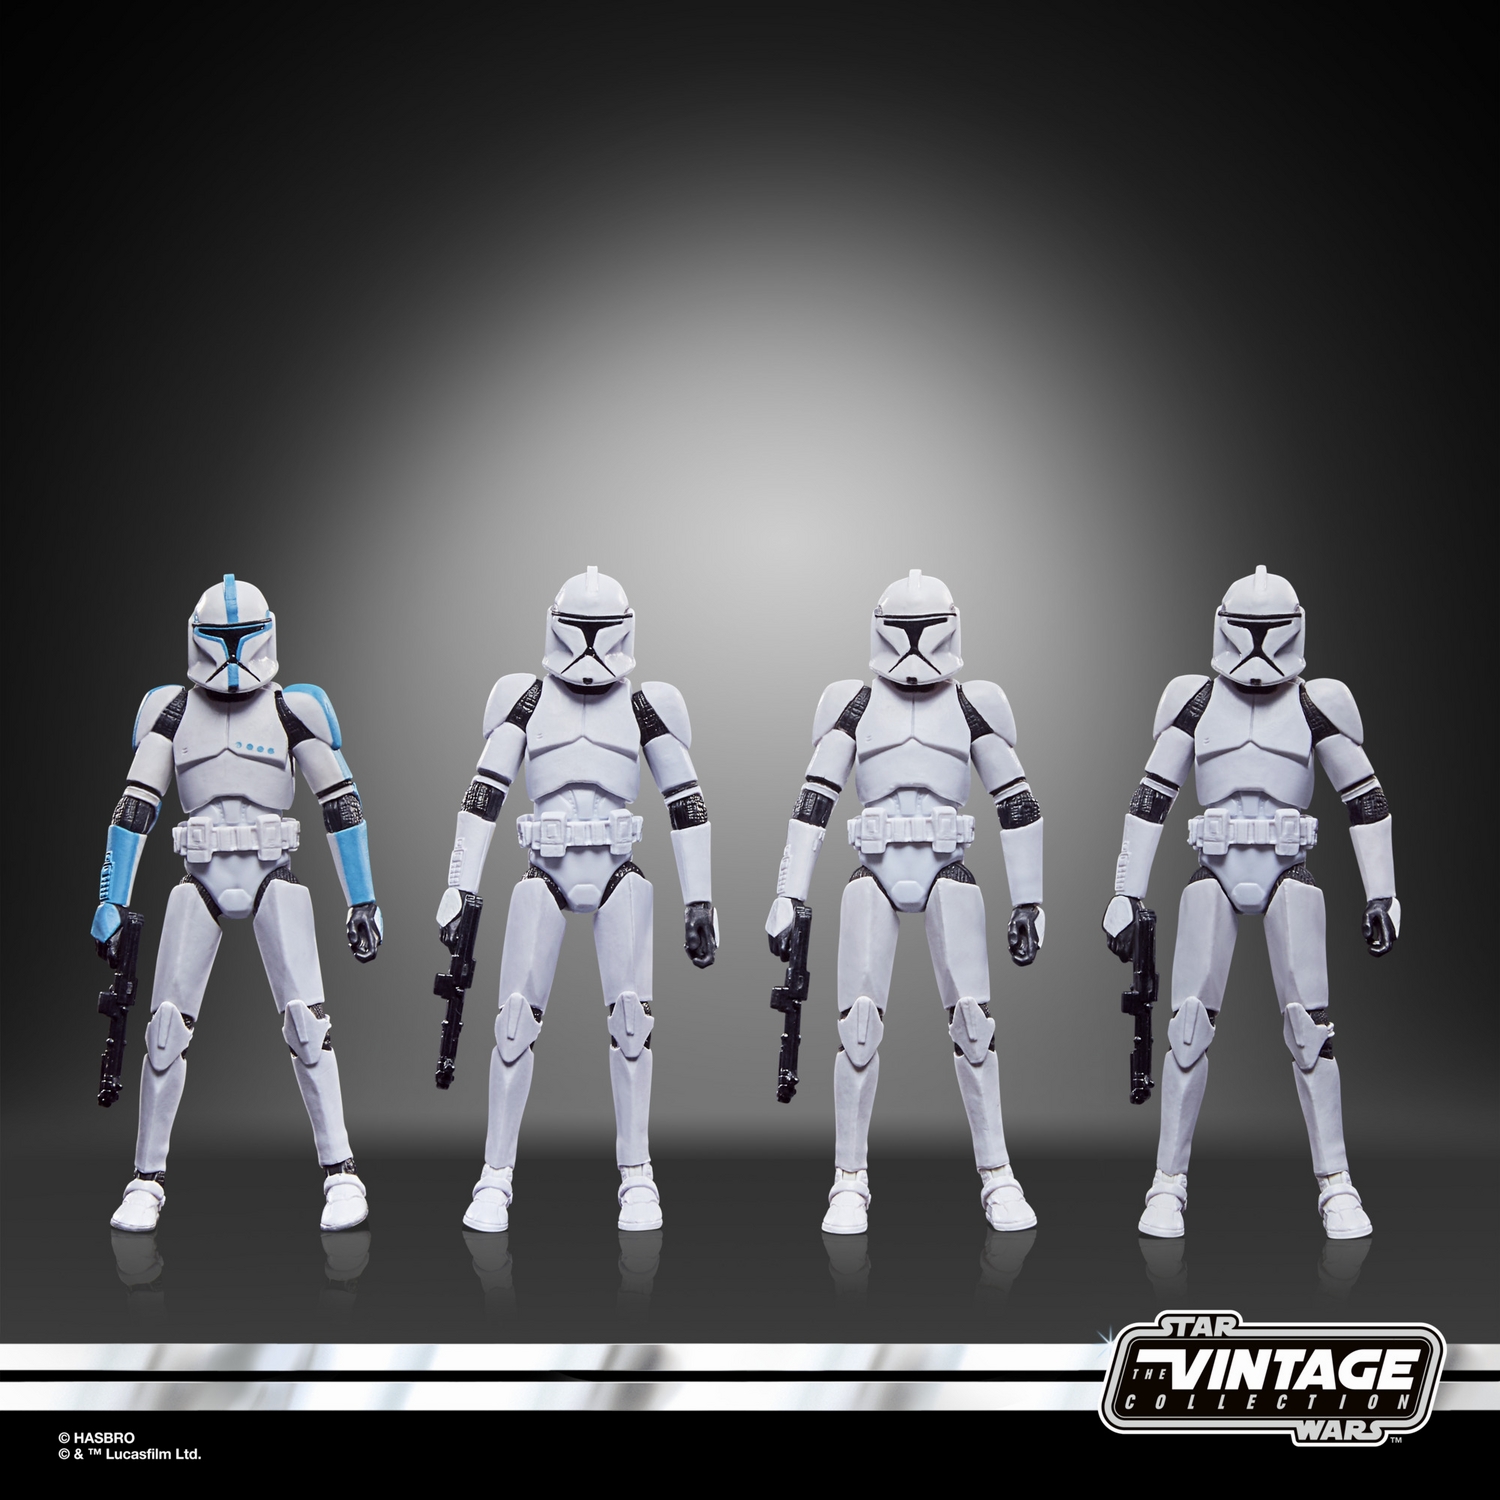 STAR WARS THE VINTAGE COLLECTION 3.75-INCH PHASE I CLONE TROOPER 4-PACK - 6.jpg